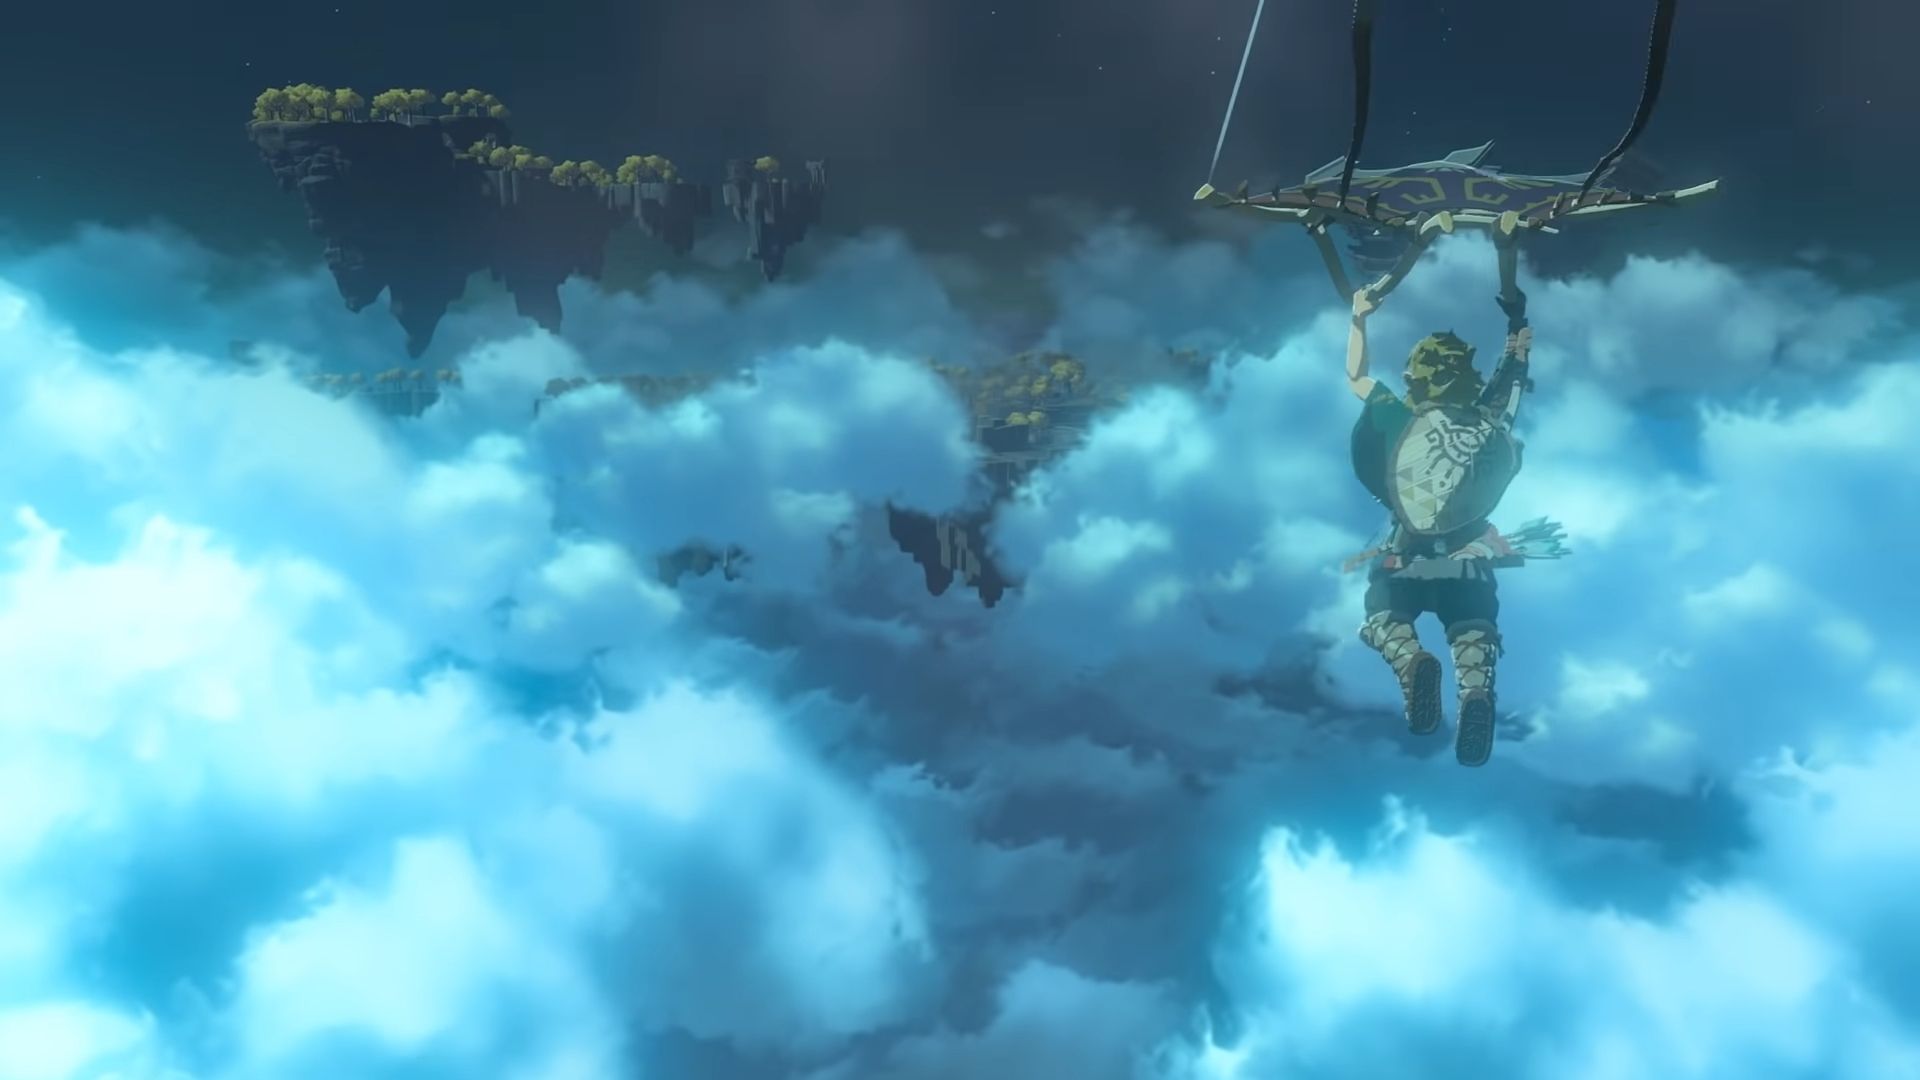 breath-of-the-wild-2-images-3